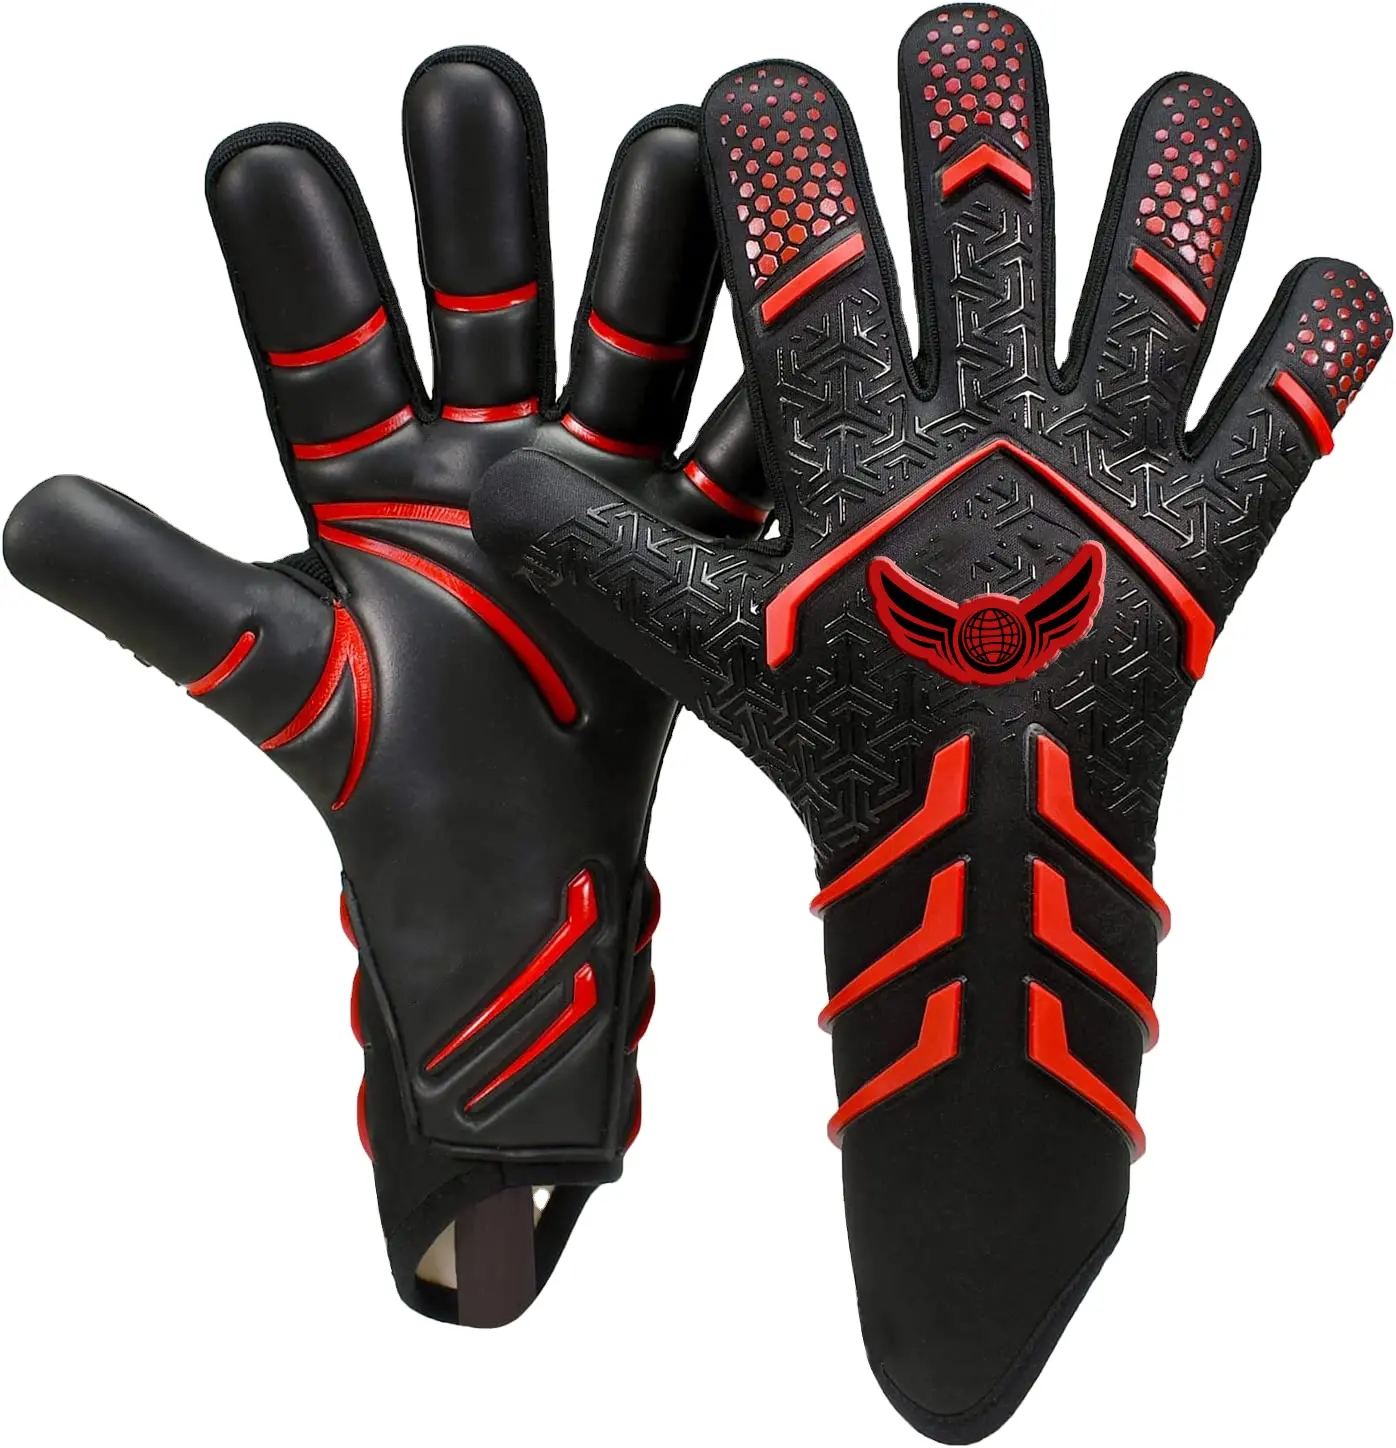 Wholesale Latex Soccer Goalkeeper Gloves with Finger Protection Professional Football Gloves